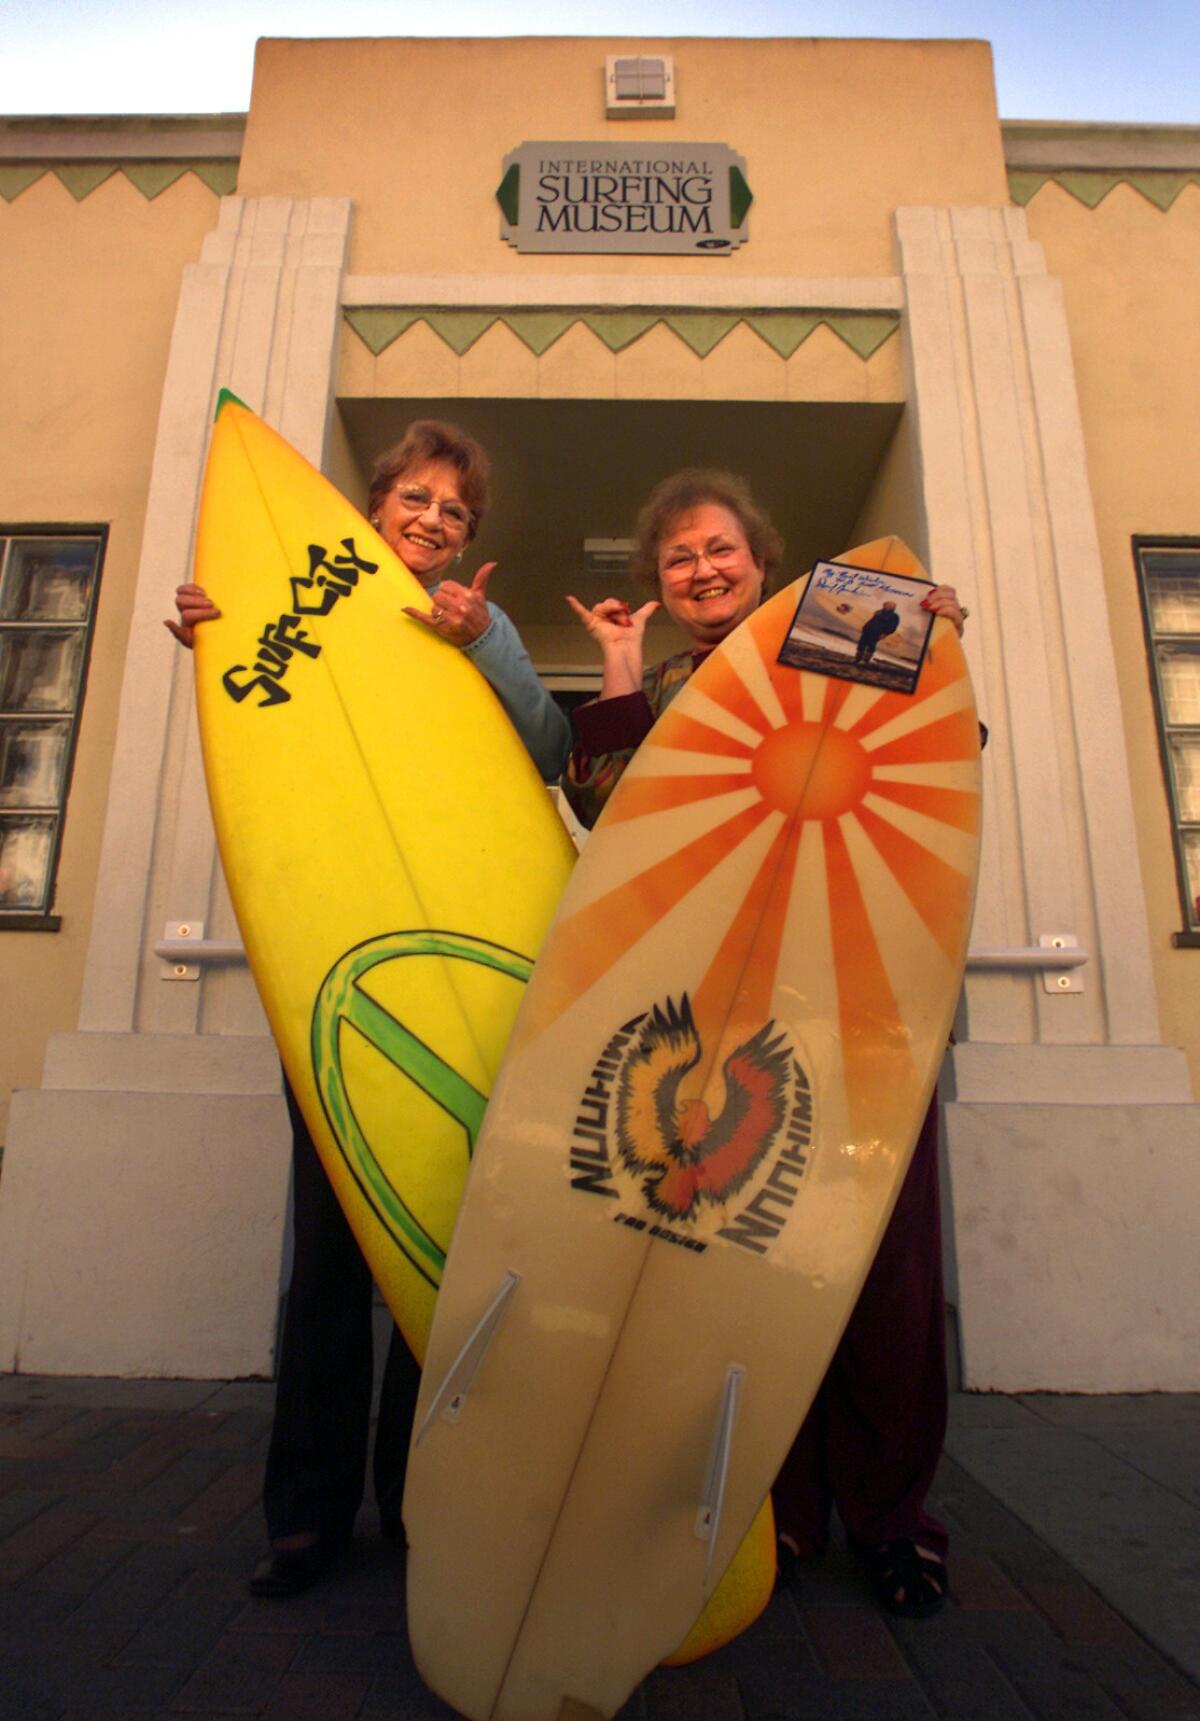 Natalie Kotsch, left, with Ann Beasley outside the Huntington Beach International Surfing Museum in 2002.